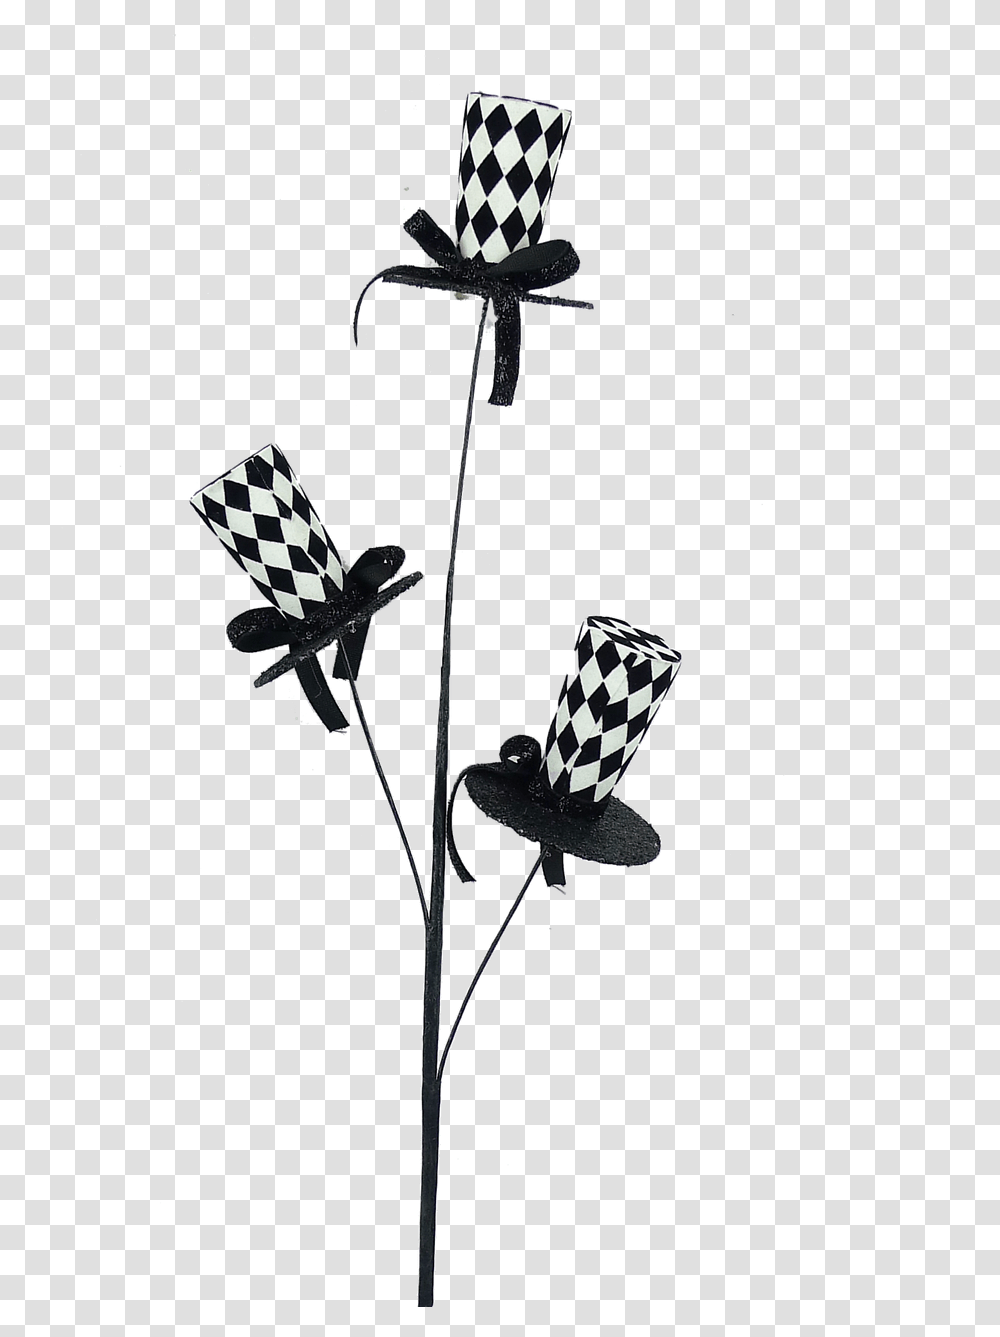 Blackwht Harlequin Top Hat Spray Lily, Chair, Furniture, Cutlery, Stand Transparent Png